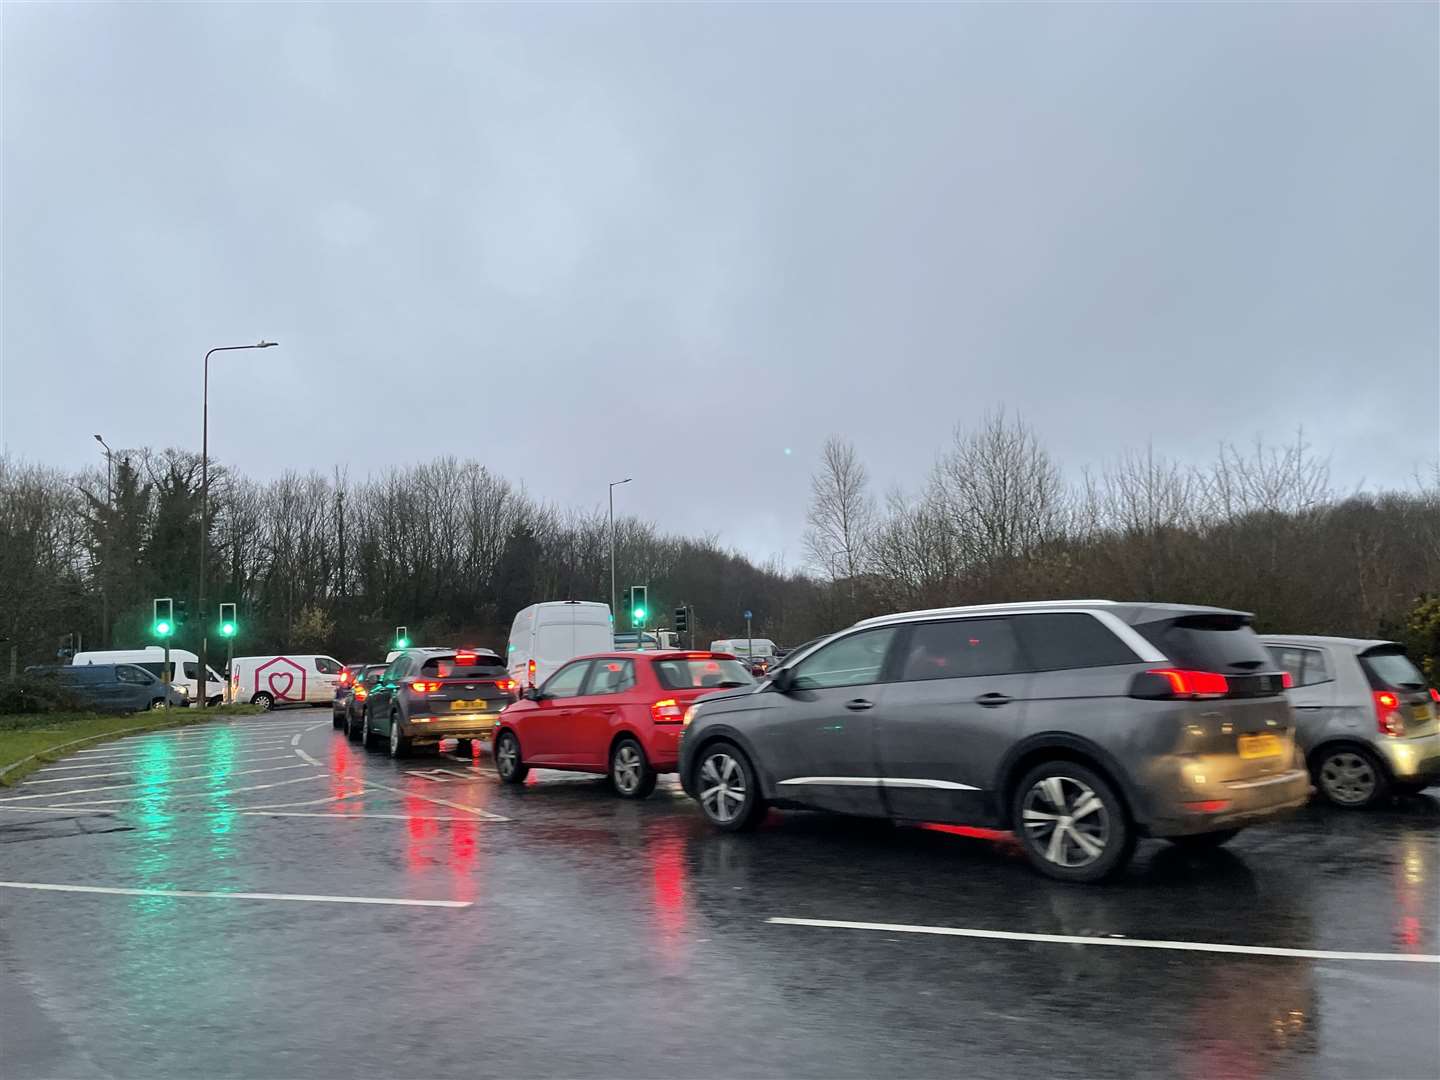 The delay is affecting traffic at the Bridgewood roundabout